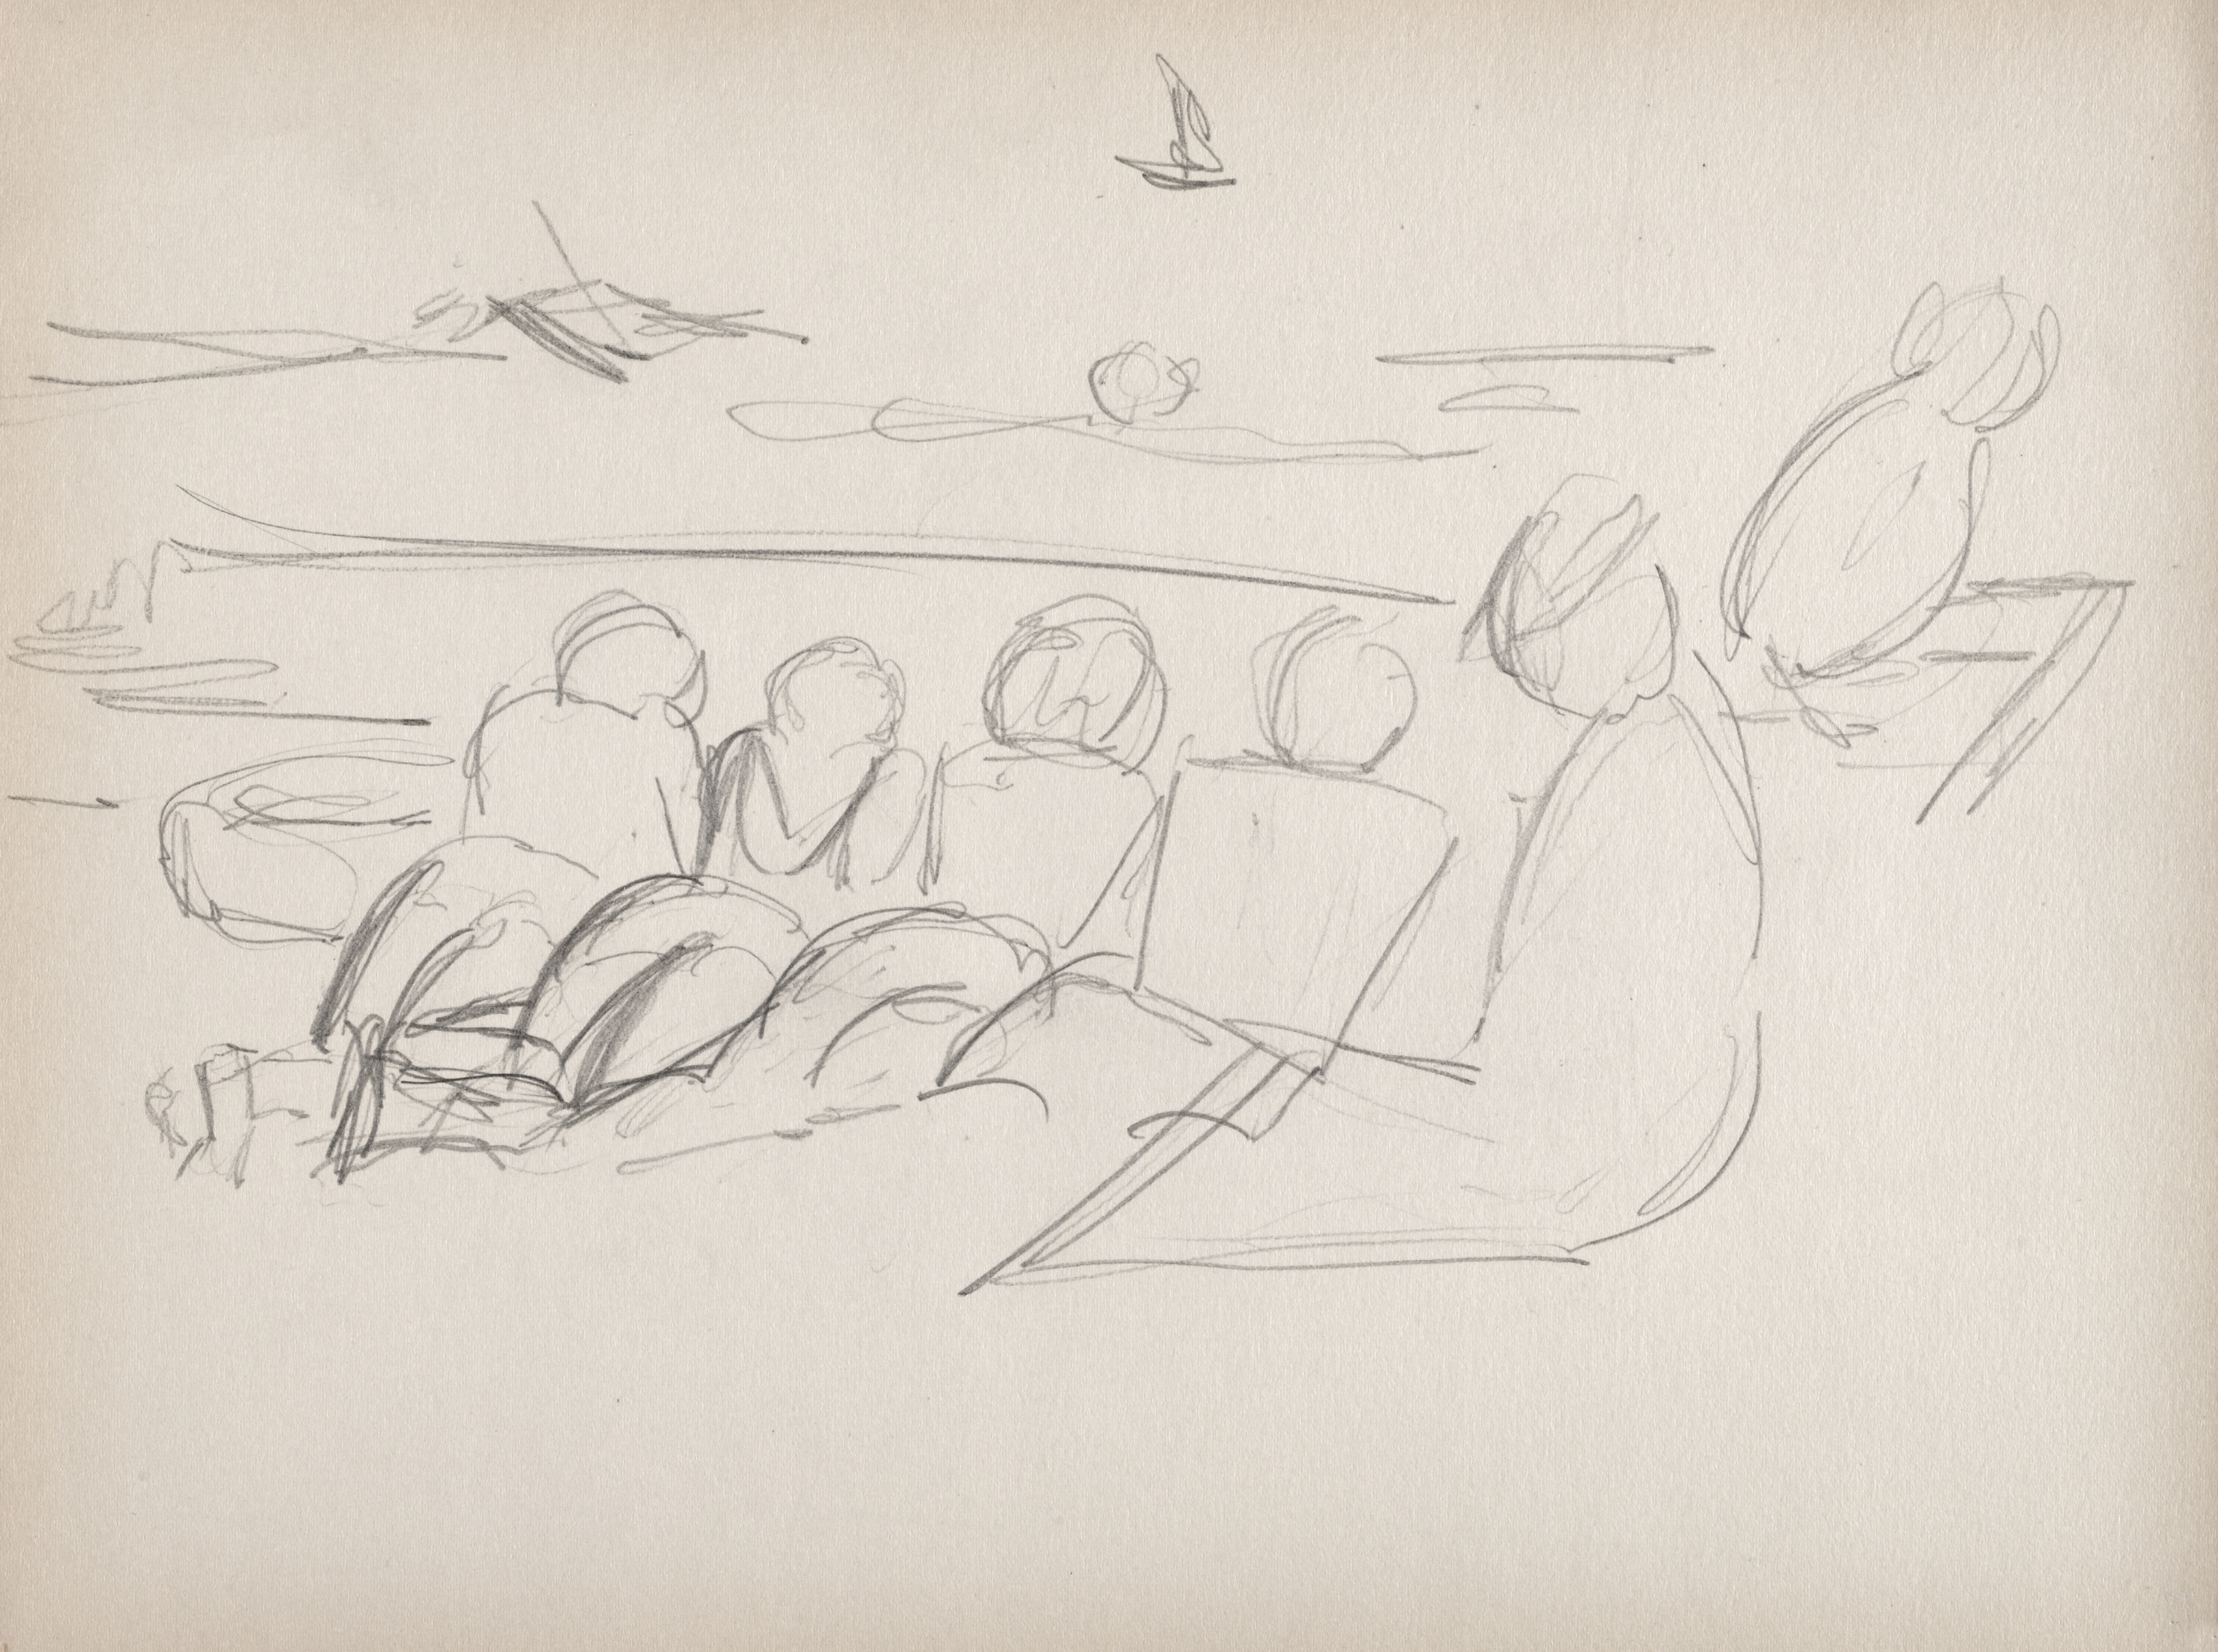 Sketchbook No. 3, page 28: Sunbathing, study for a woodcut